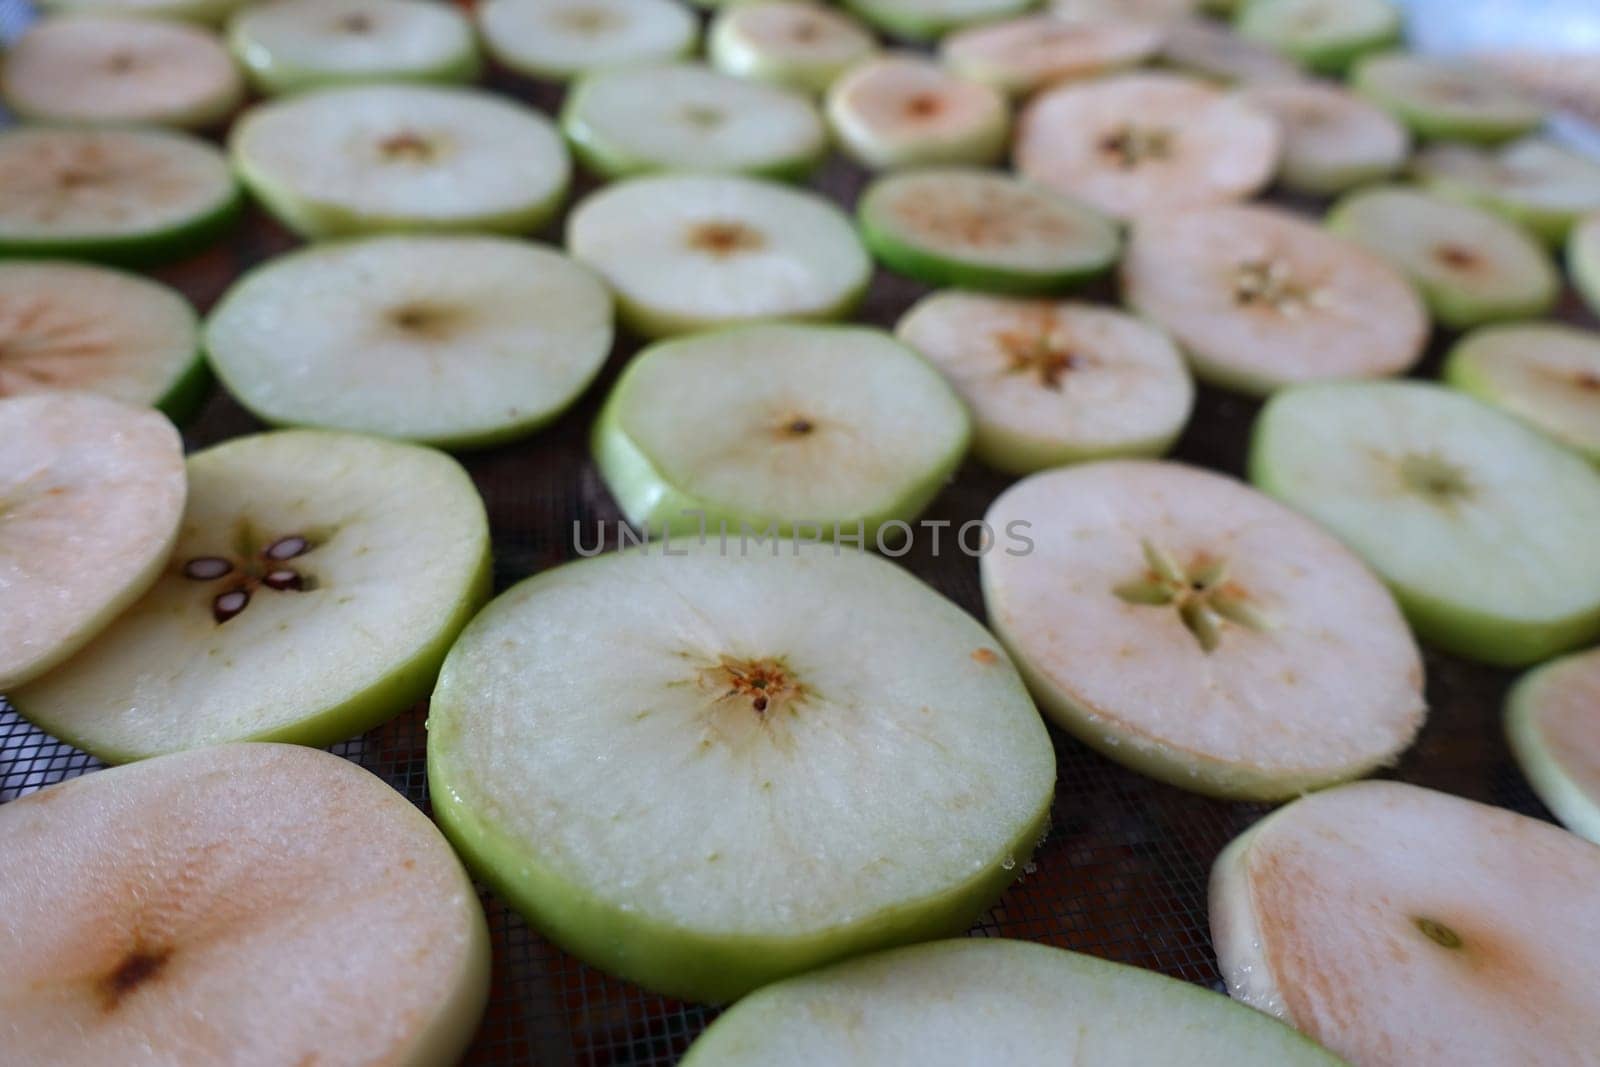 apple drying process,close-up sliced apple slices left to dry, by nhatipoglu